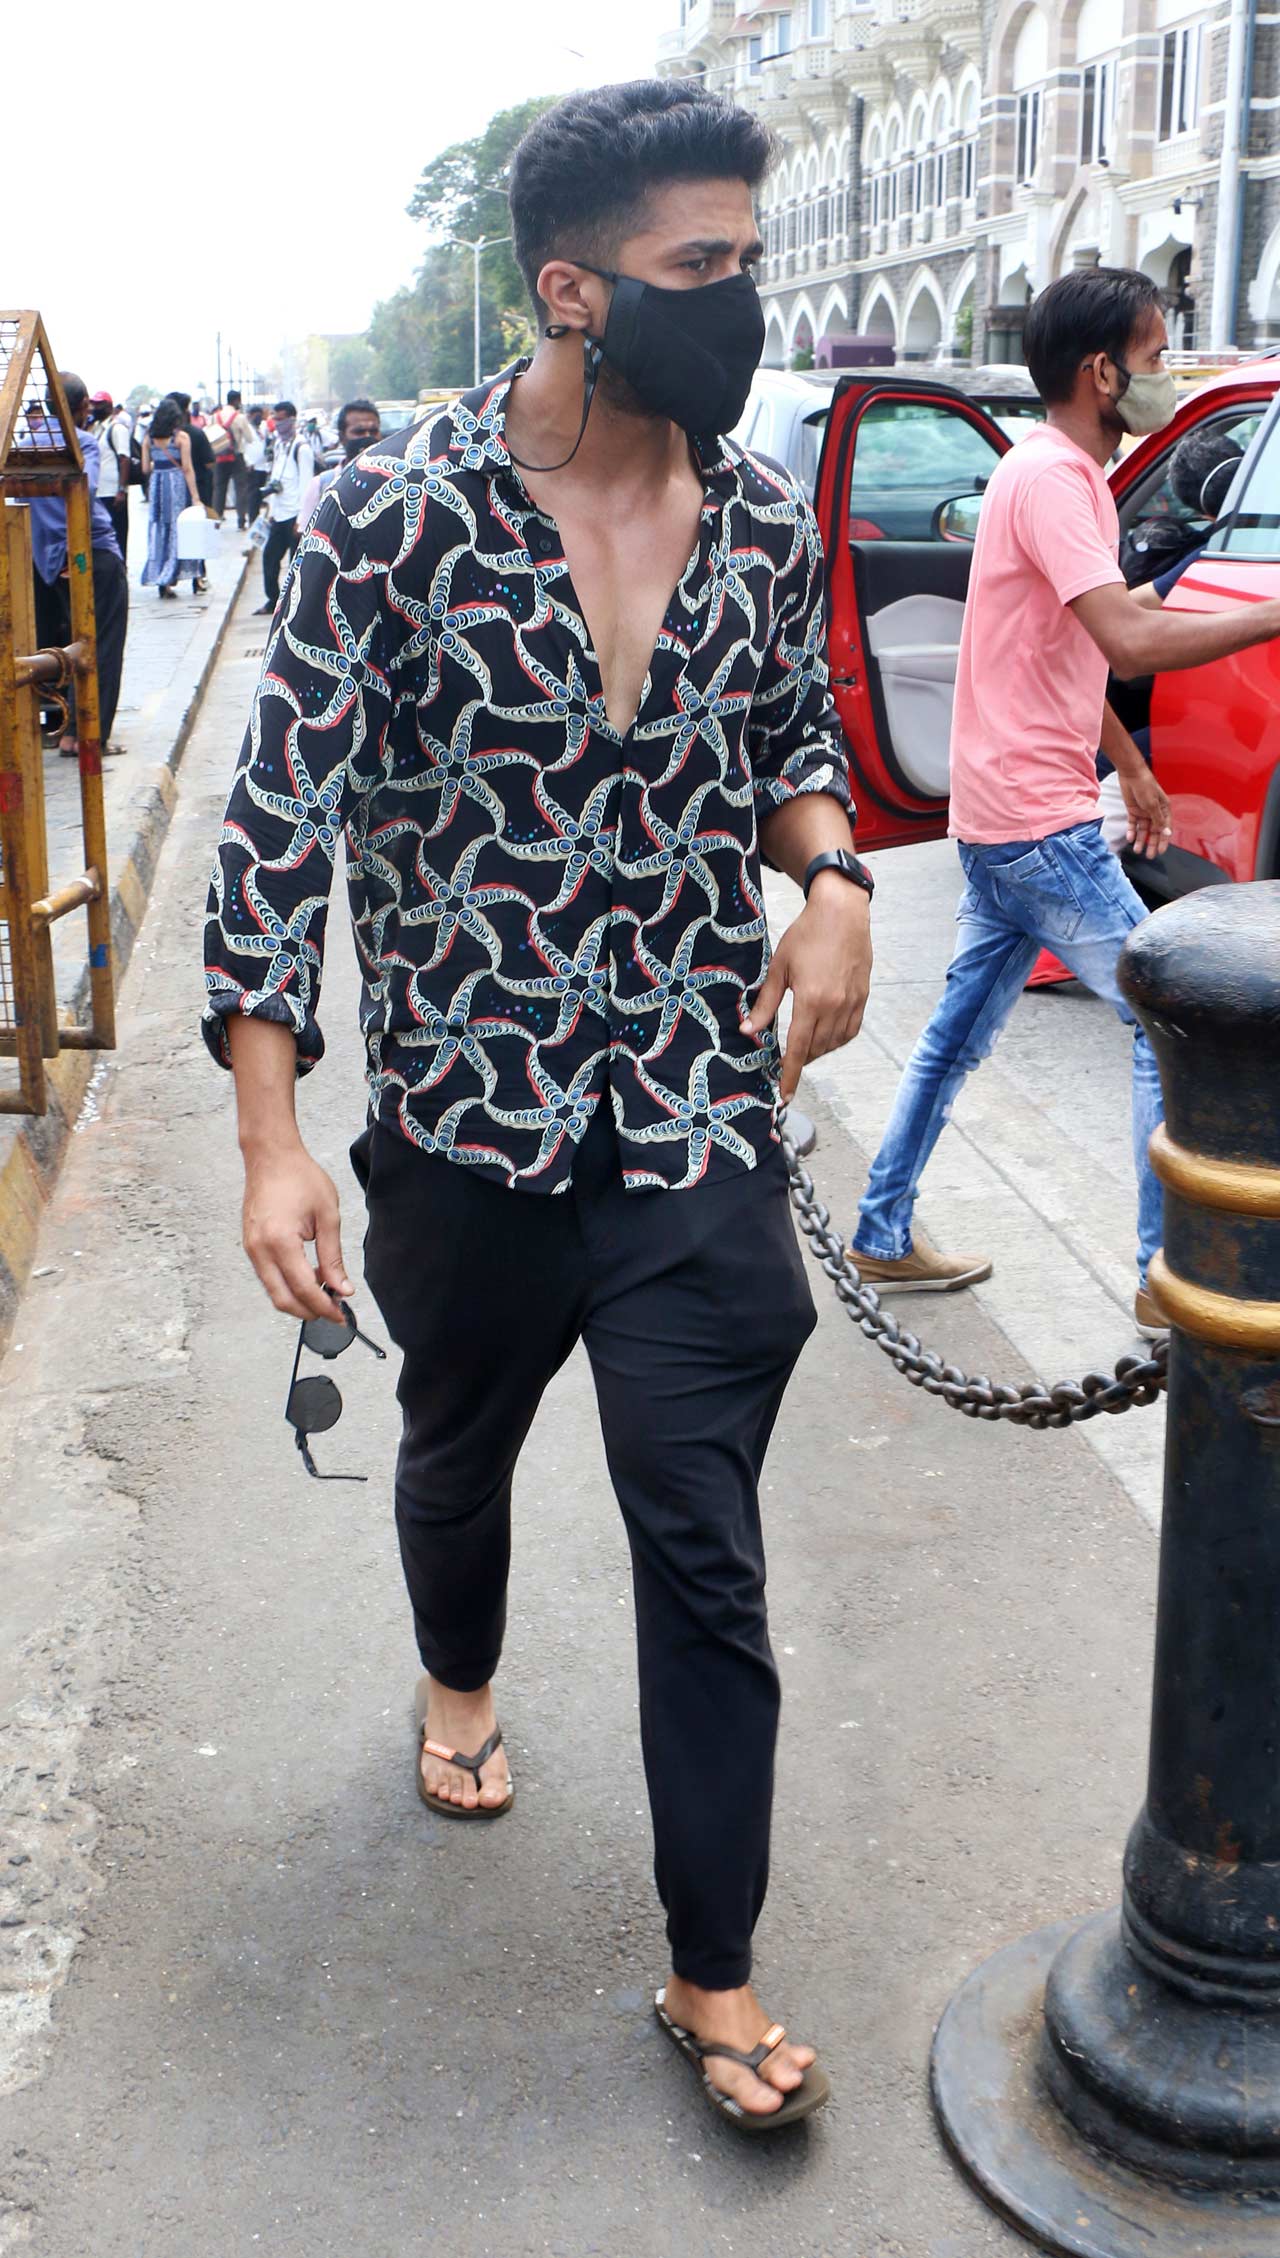 Saqib Saleem donned a causal avatar as he too got clicked by the media. He recently turned 33 on April 8. He made his Bollywood debut with 2011’s Mujhse Fraandship Karoge and was later seen in films like Mere Dad Ki Maruti, Hawaa Hawaai, Dishoom, and Race 3. He’s now gearing up for Kabir Khan’s ‘83.